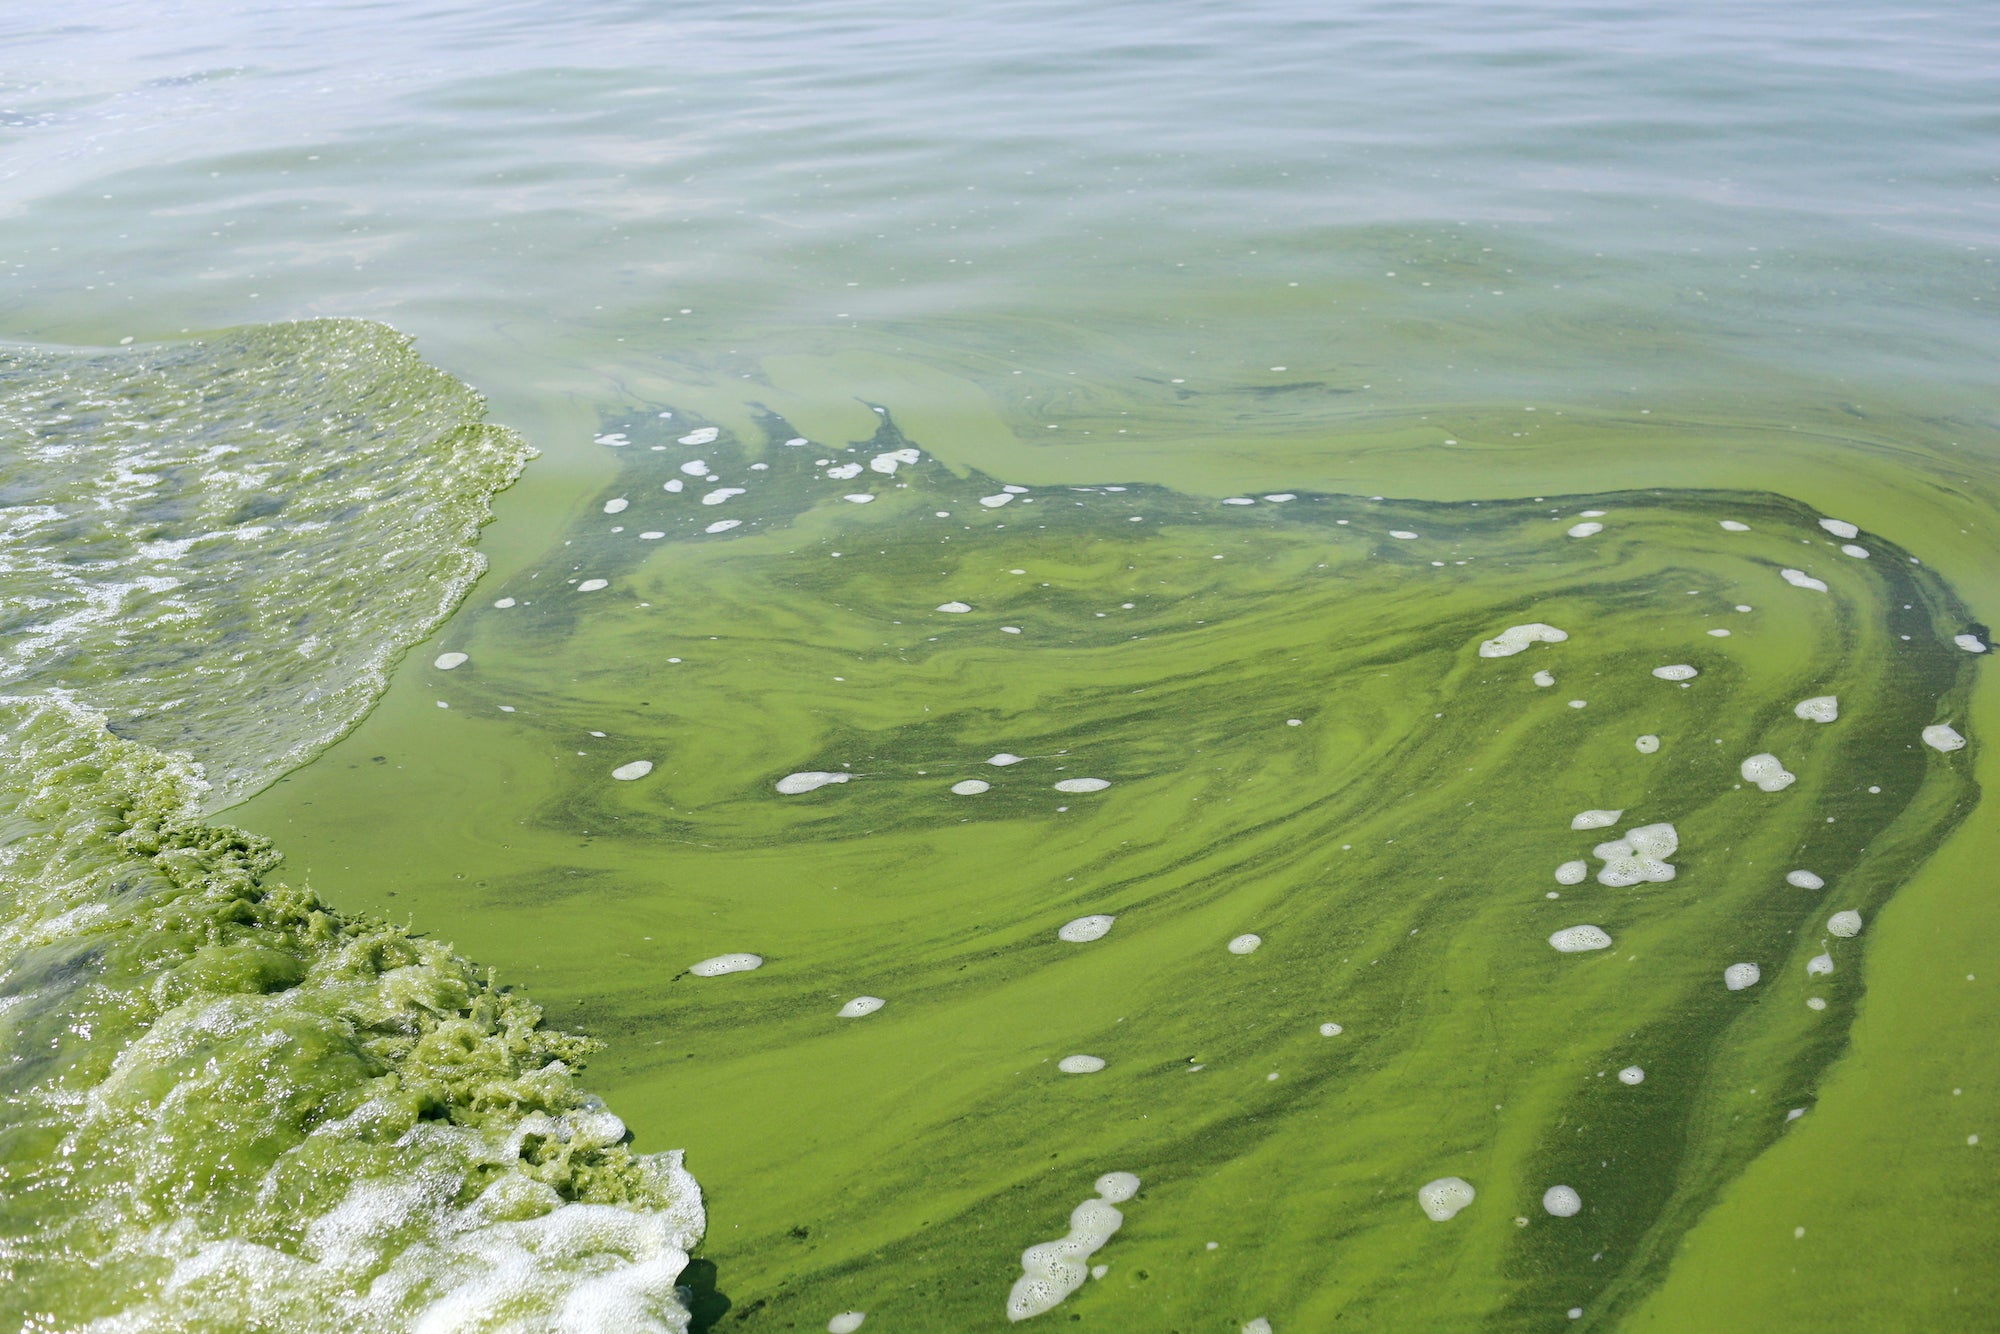 Waging a 13.5M battle against pond scum in N.J.’s lakes WHYY